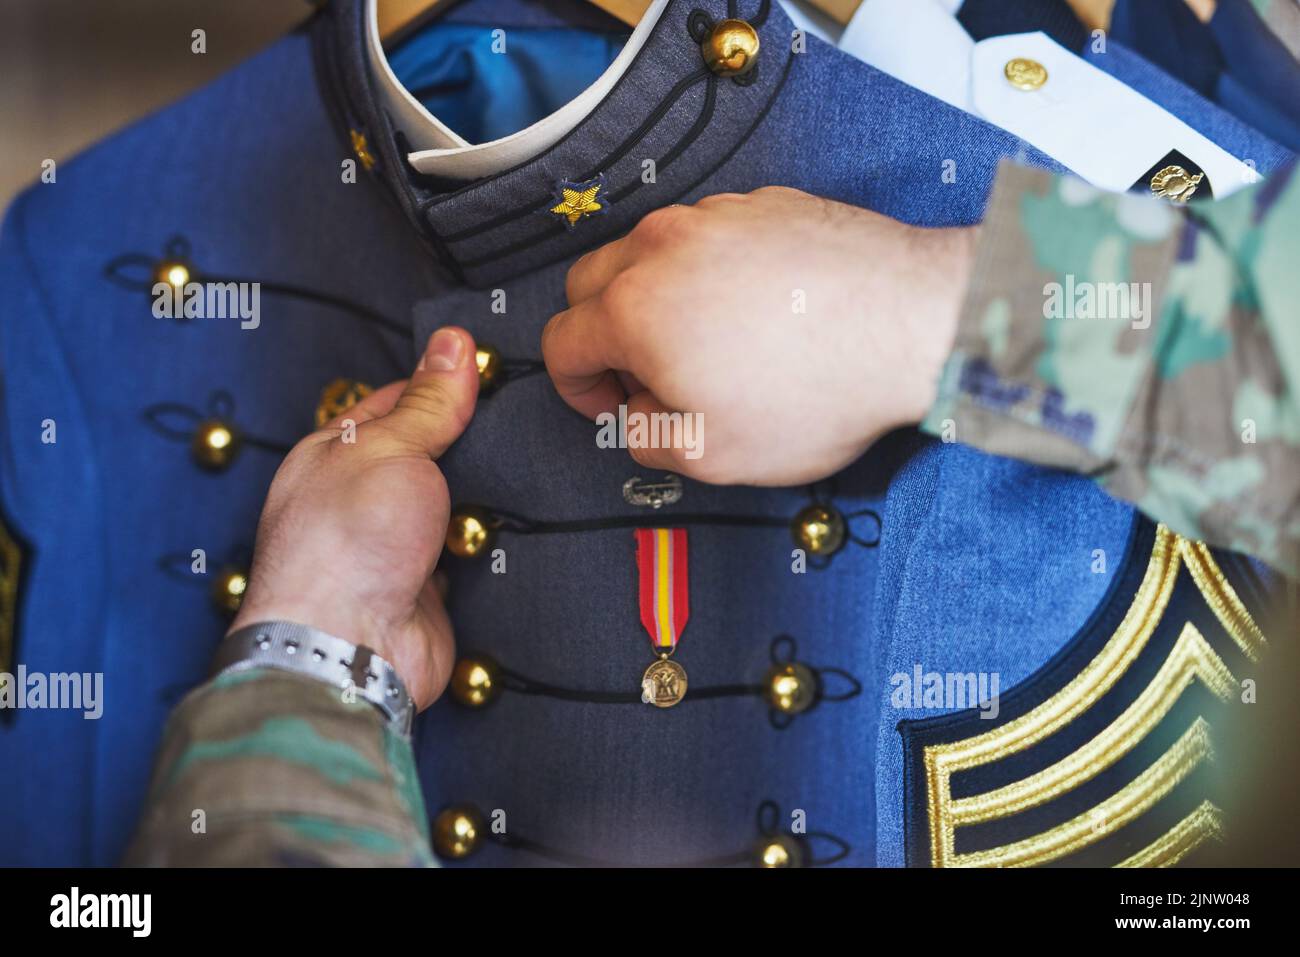 Keep your heroism close to your heart. a soldier pinning a medal to his jacket. Stock Photo